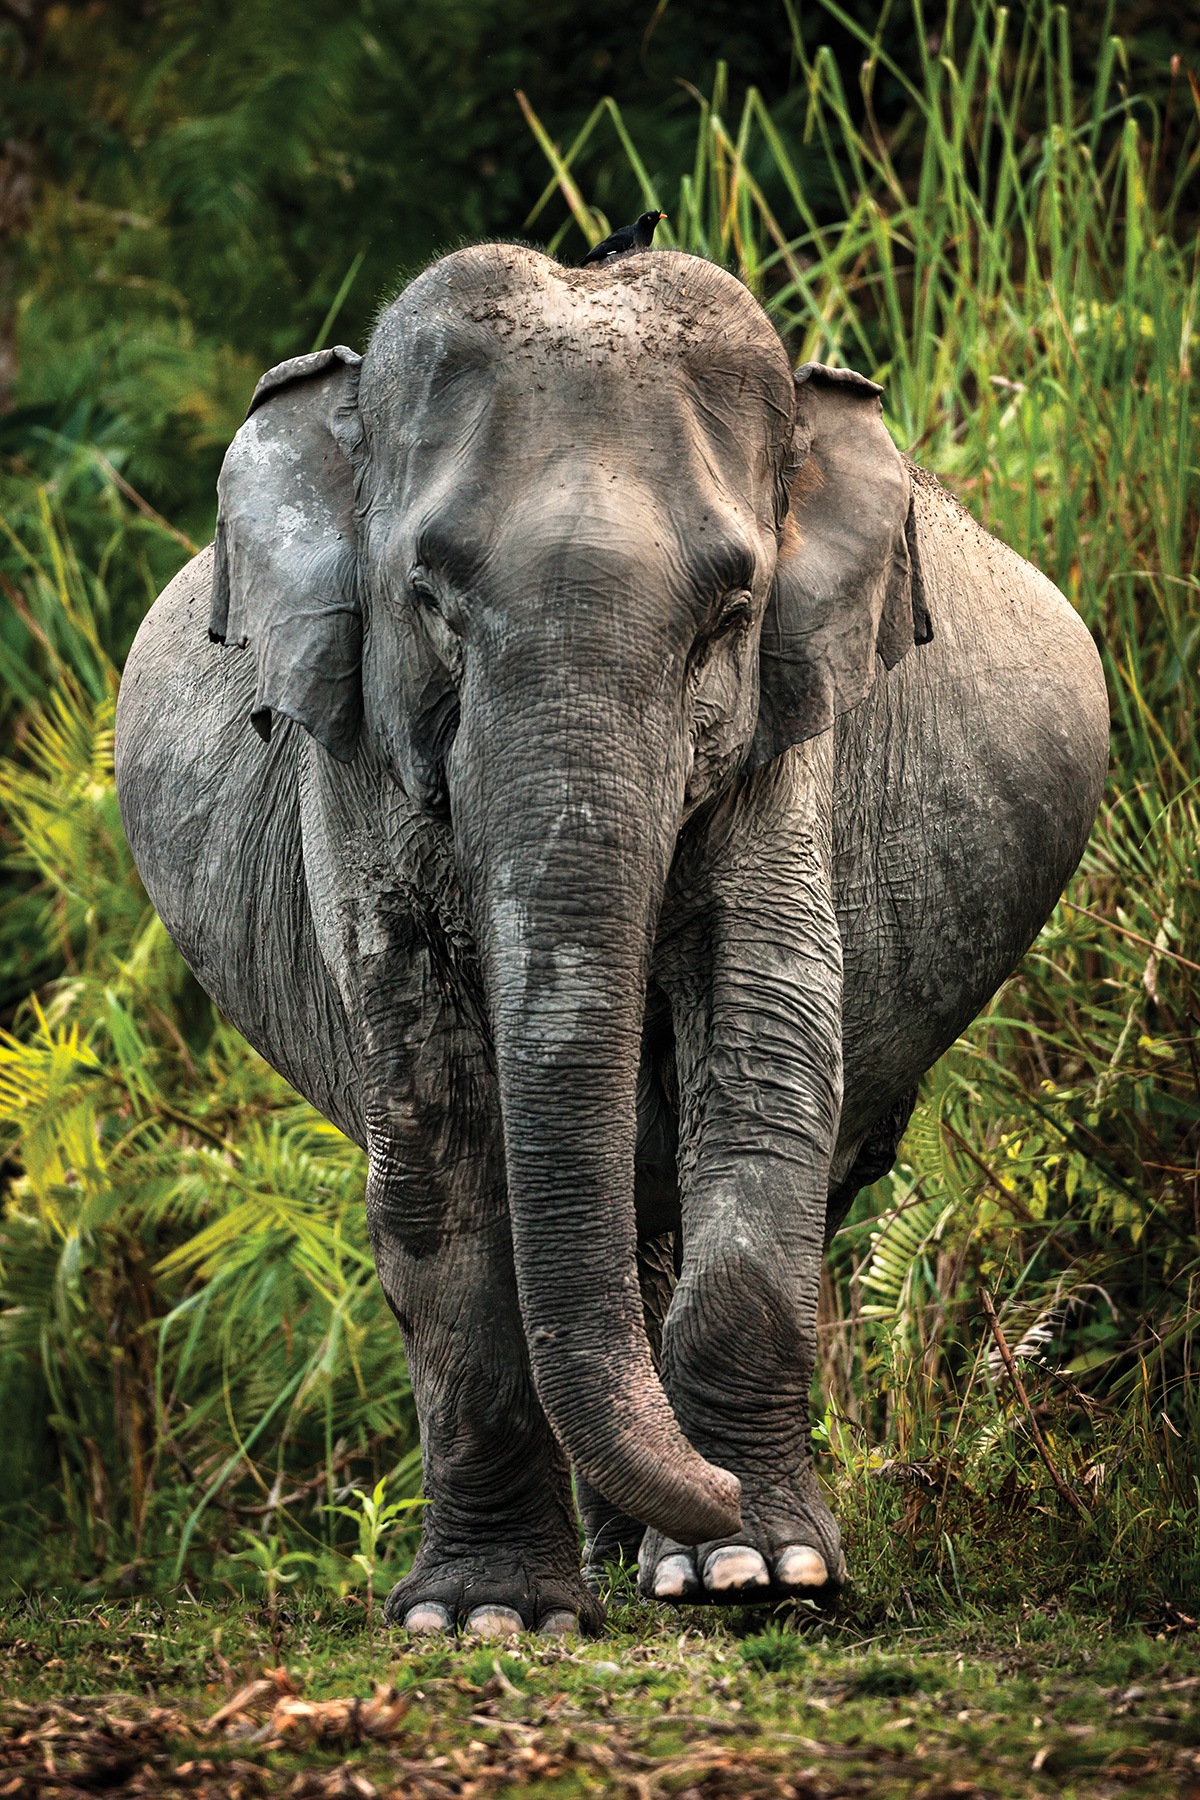 A pregnant elephant seen from the front